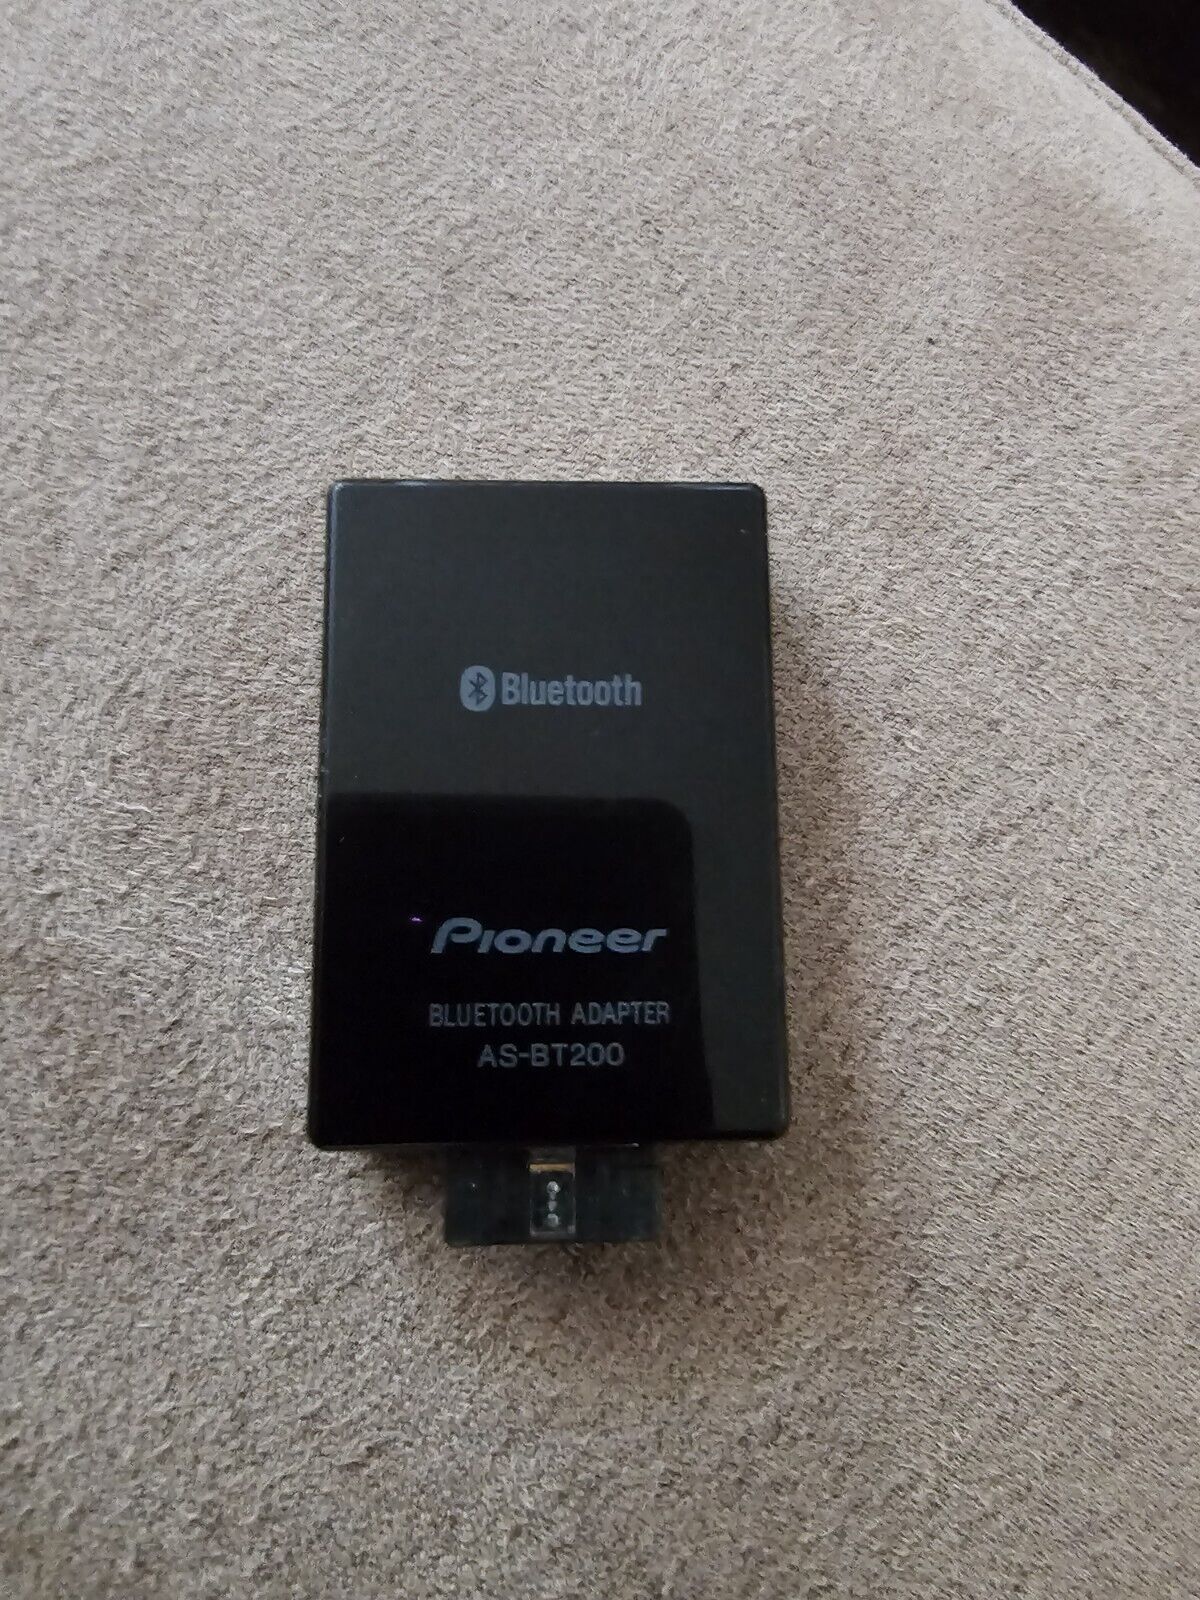 Pioneer AS-BT200 Bluetooth Wireless Adapter. Perfect